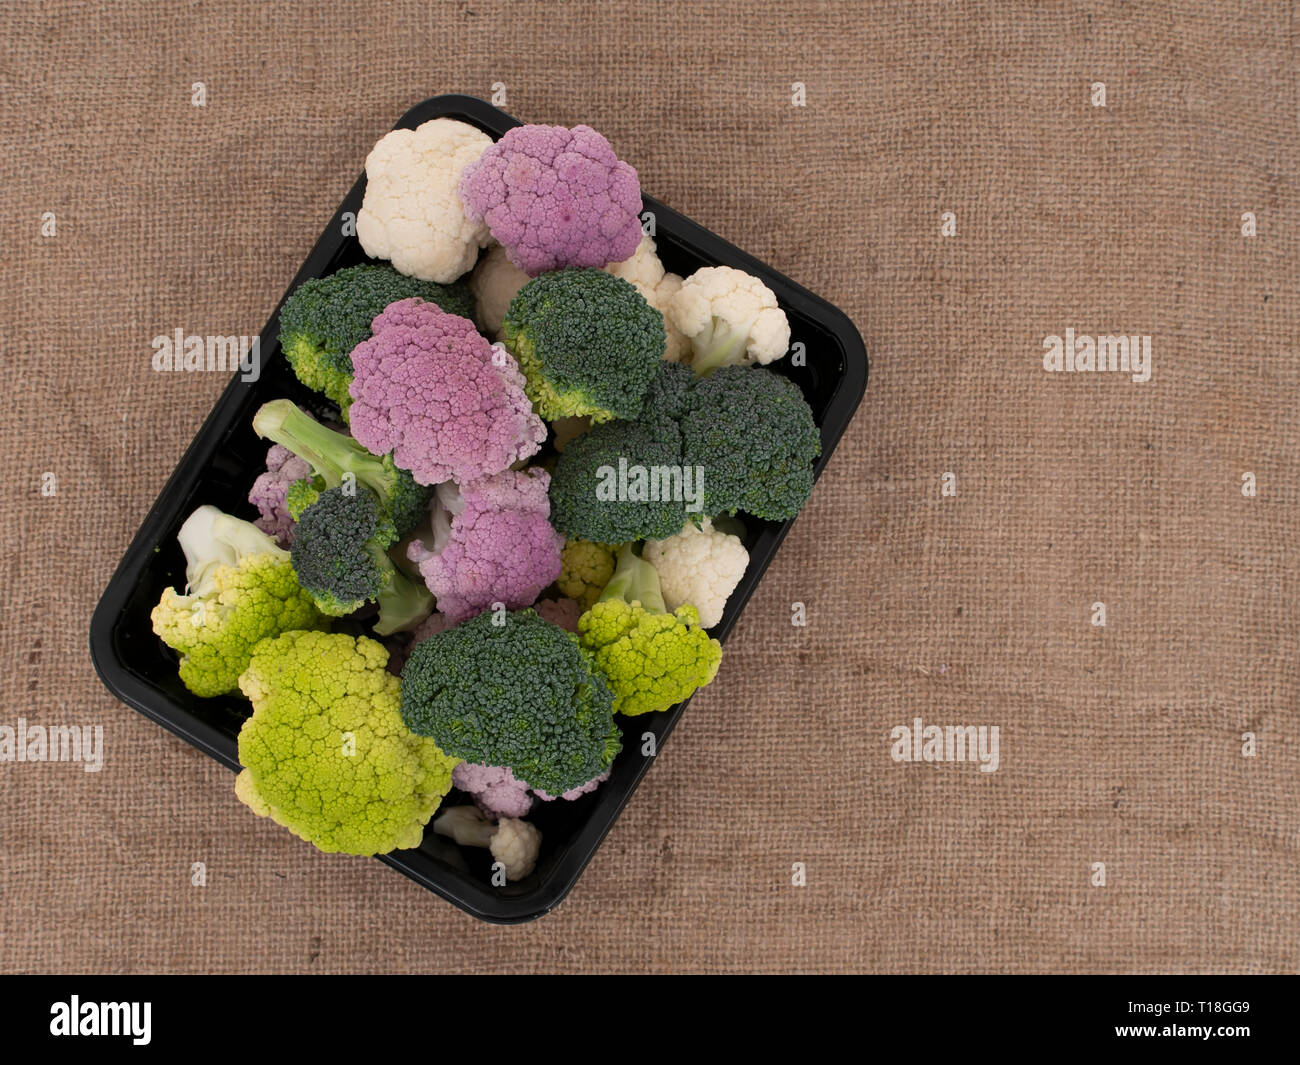 Colourful vegetables, on hessian with copyspace. Raw purple, white and green cauliflower with broccoli florets. Healthy assortment. Stock Photo